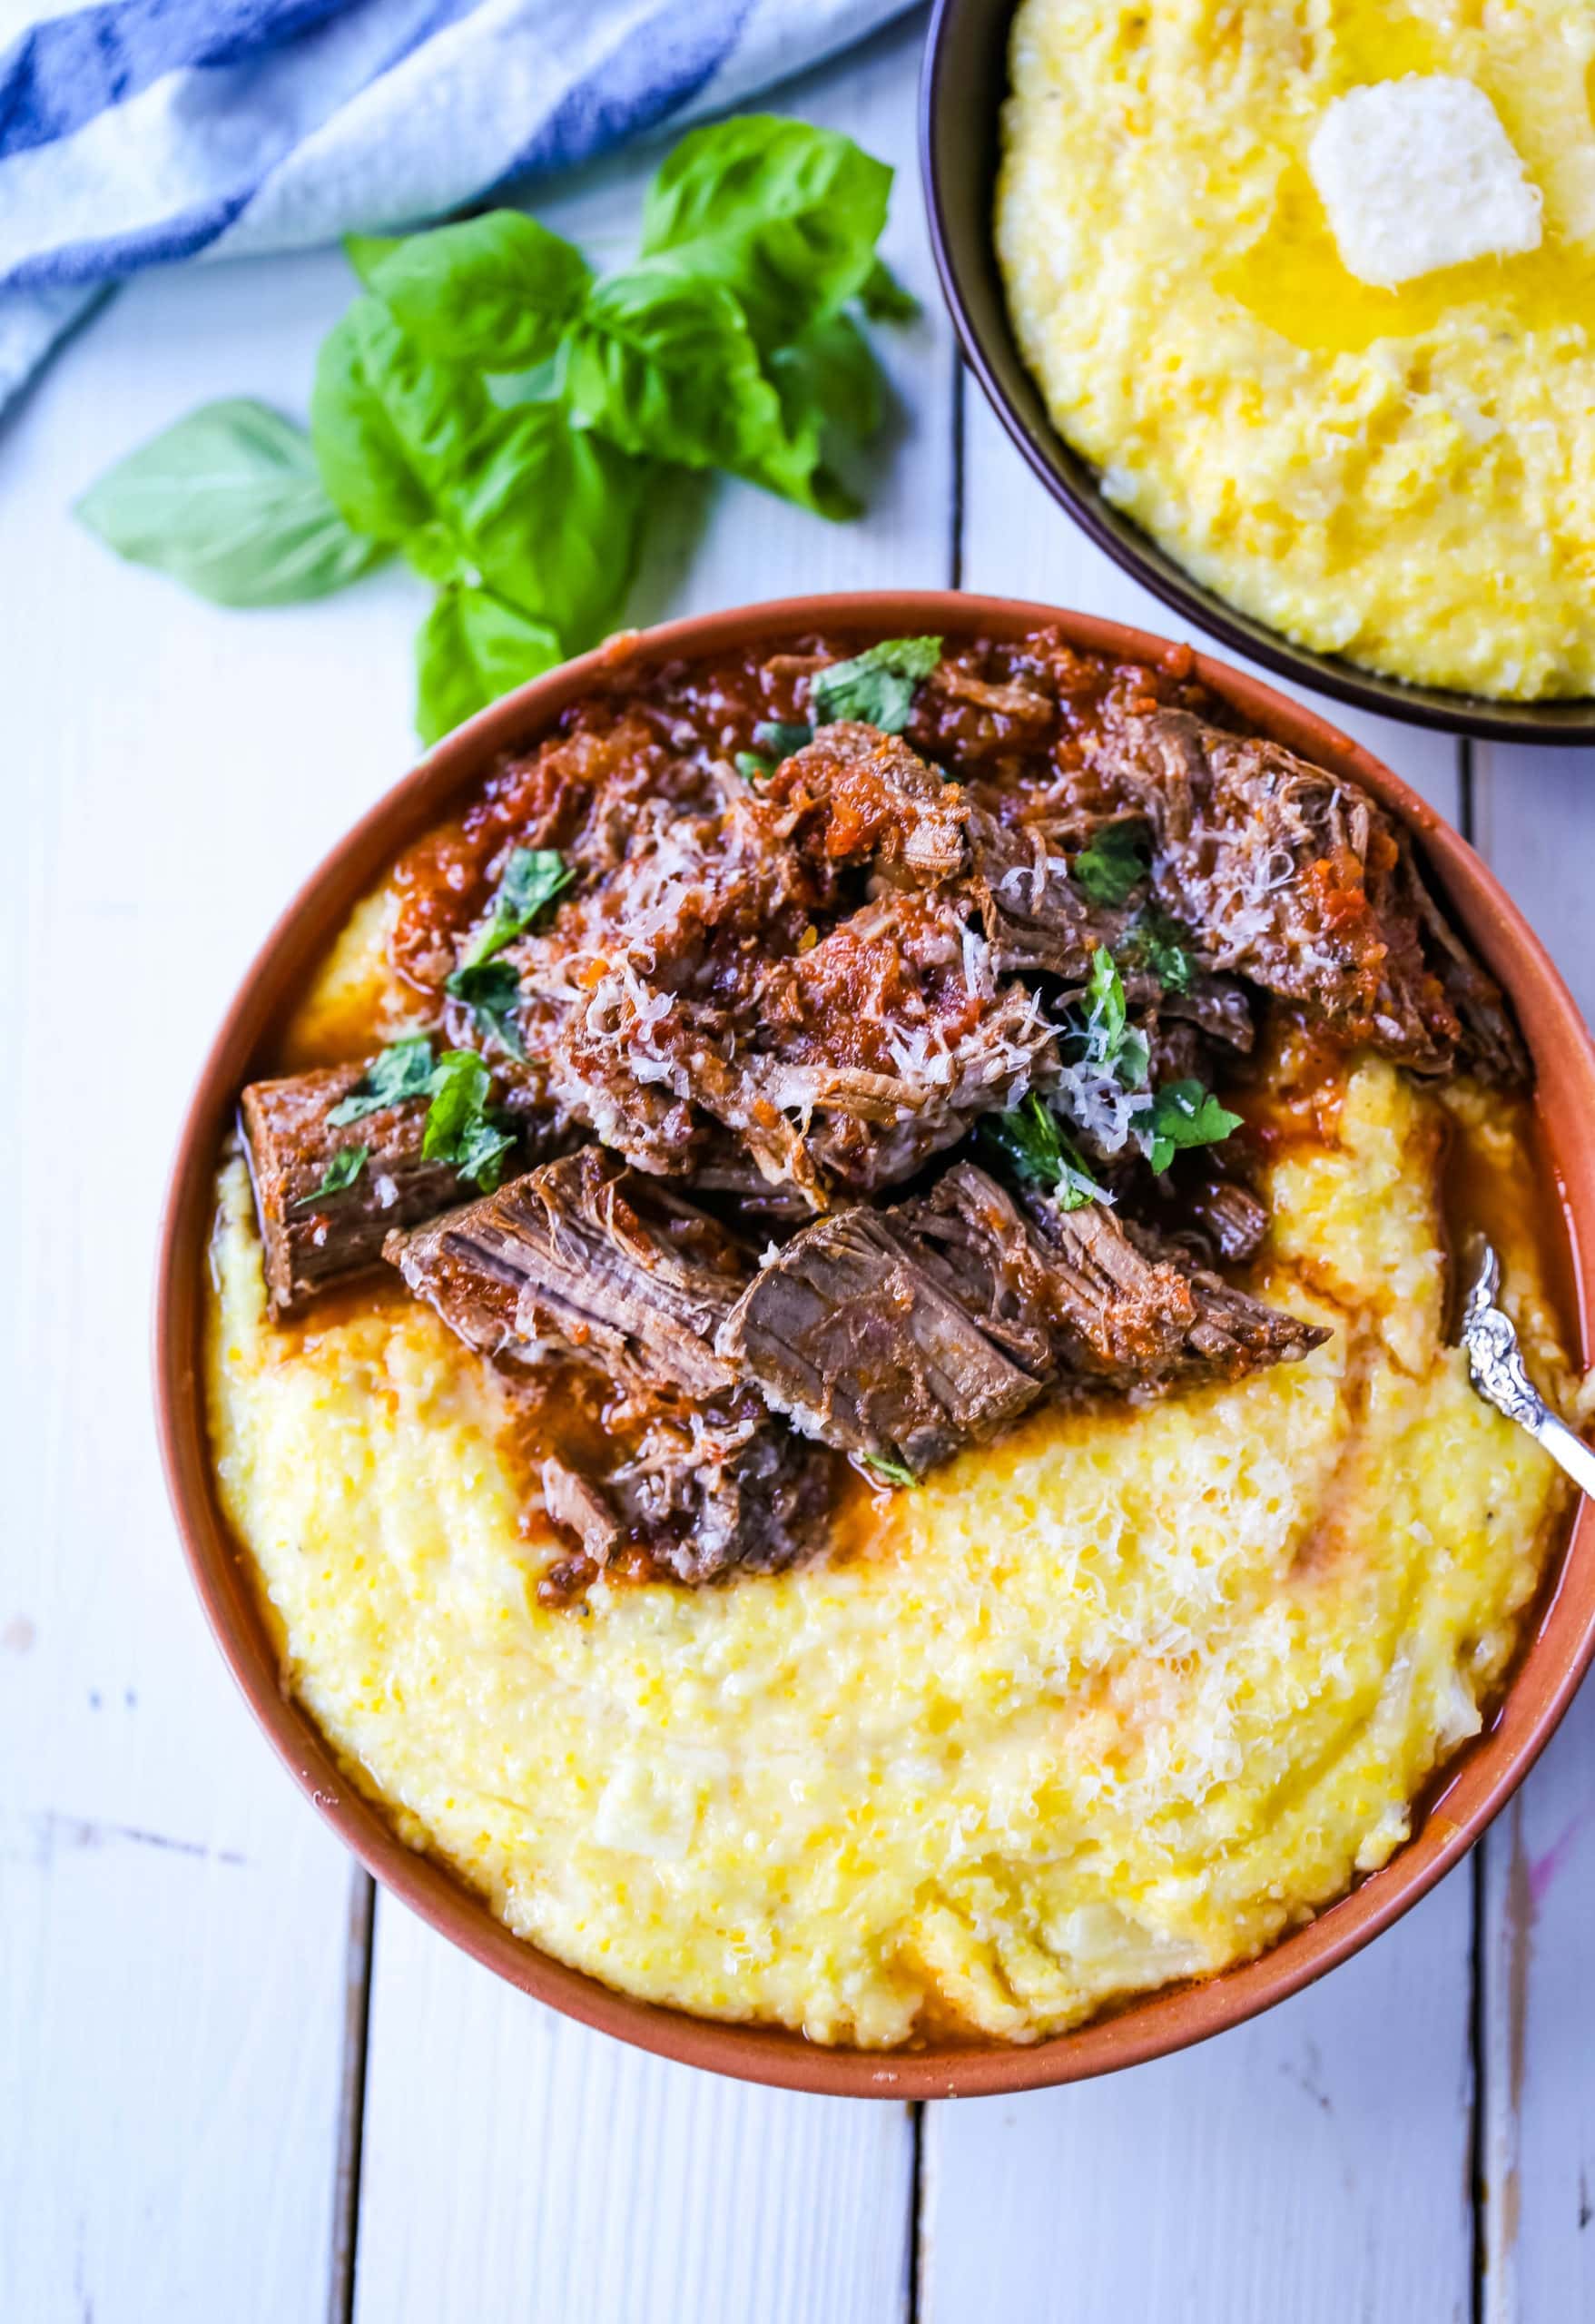 Italian Braised Beef Ragu with Parmesan Polenta Slow-cooked braised beef in a hearty homemade Italian tomato garlic sauce on top of creamy parmesan polenta. A true comfort food! www.modernhoney.com #ragu #italian #italianfood #polenta #beef #slowcooker